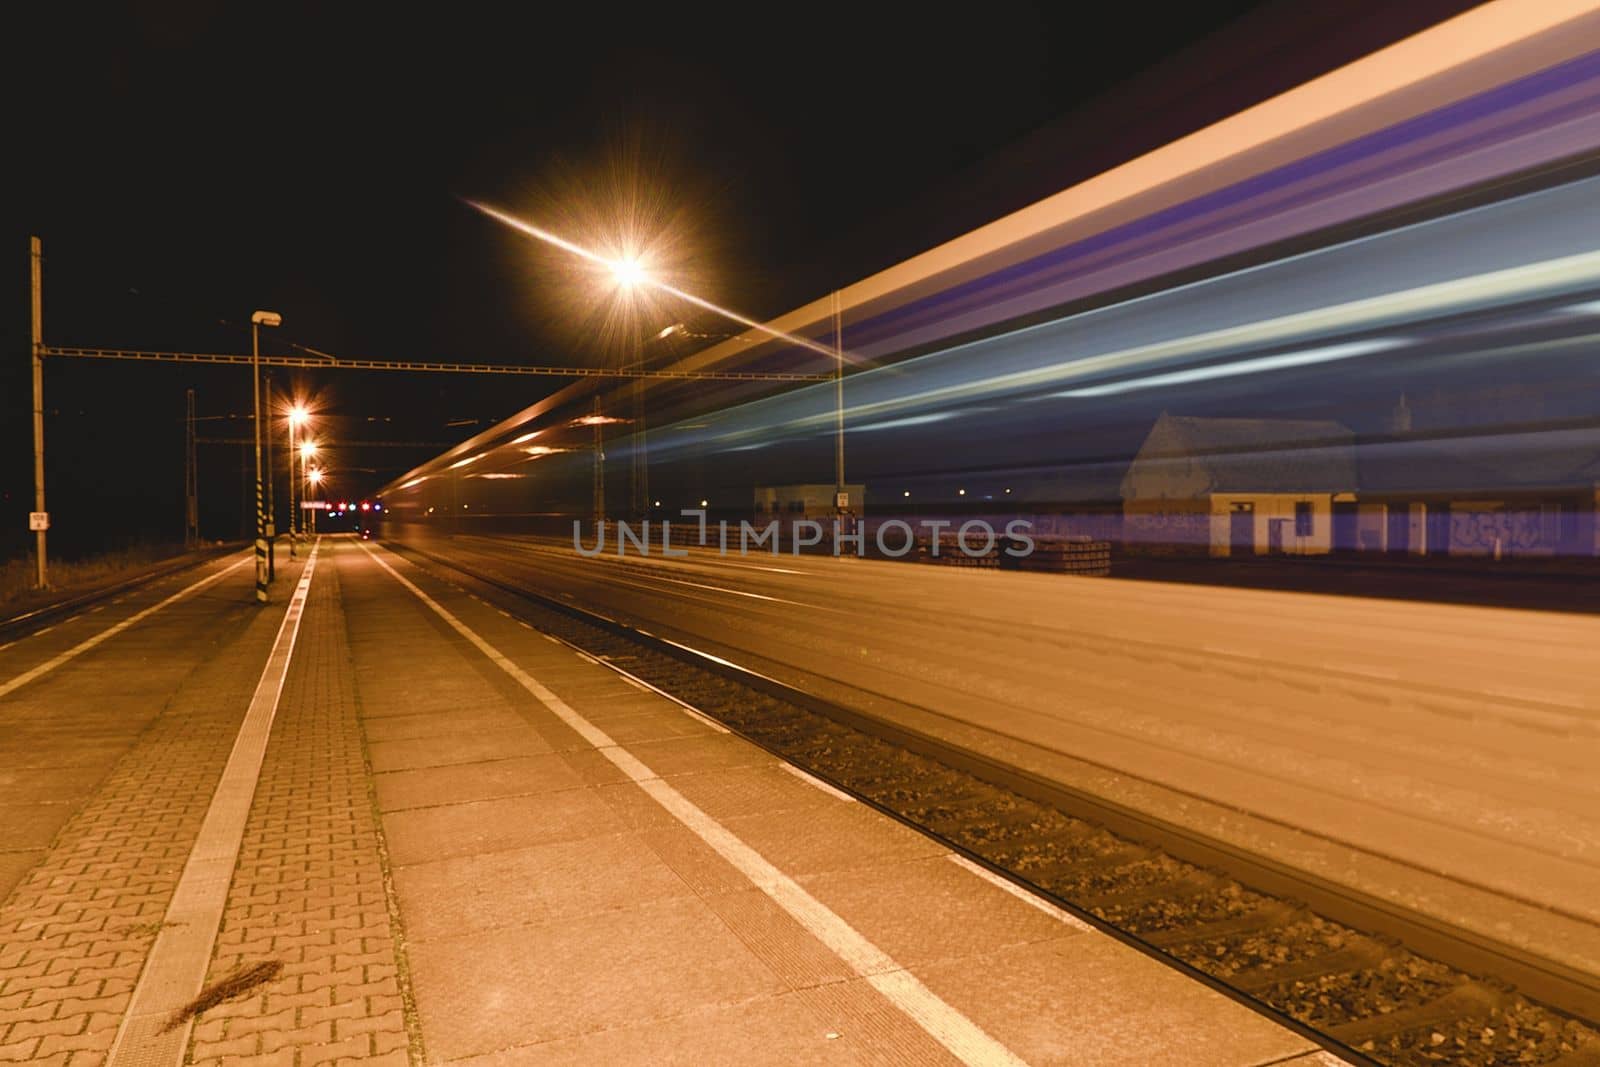 Light trail of the express traint in the railway station at the night. Railway platform a the night